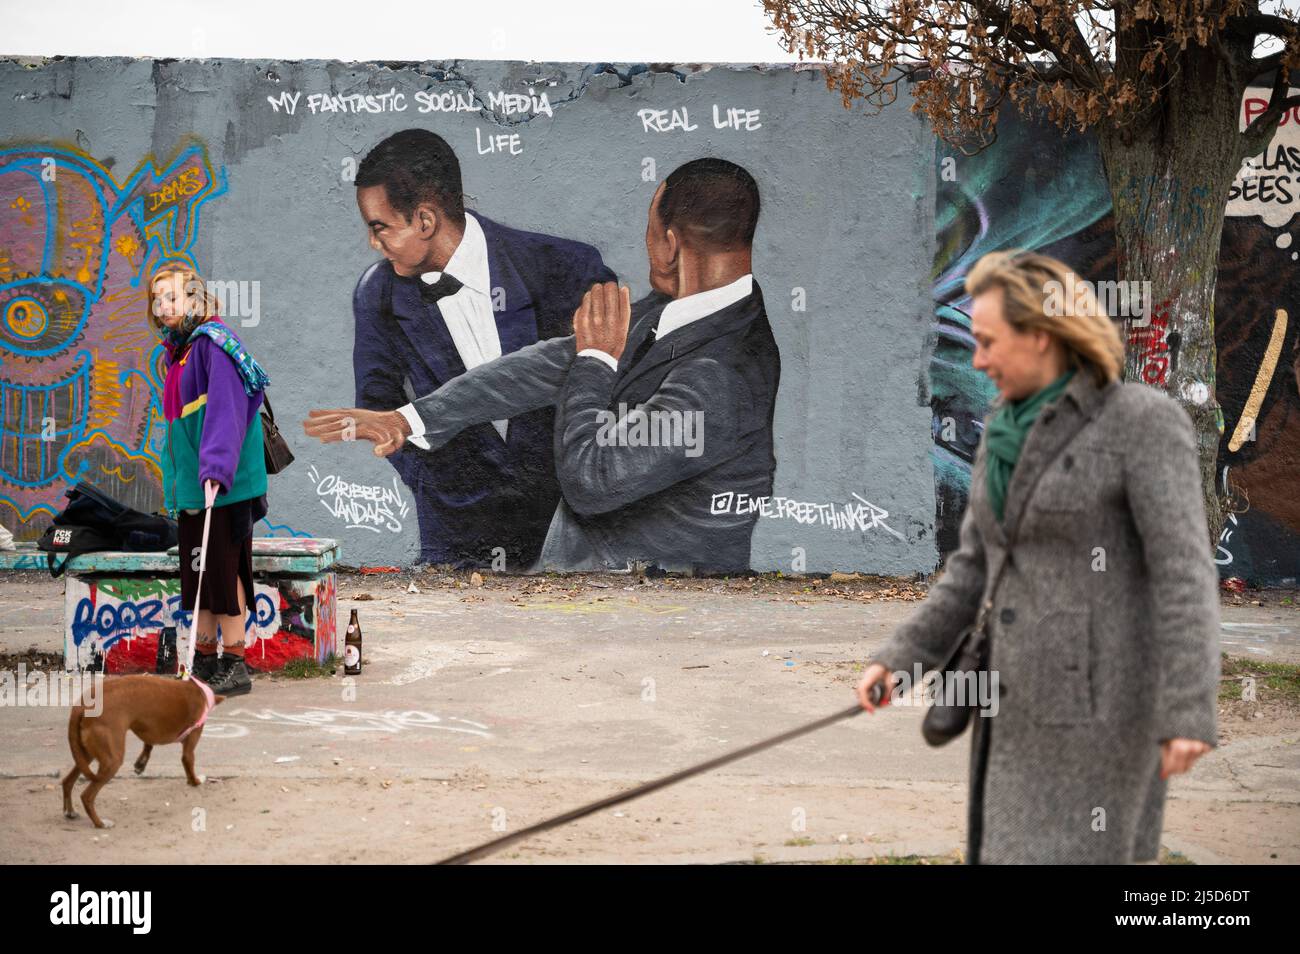 '30.03.2022, Berlin, Germany, Europe - Two women walk their dogs while in the background graffiti by artist Eme Freethinker is seen on a segment of the Berlin Wall in Berlin's Mauerpark in the Prenzlauer Berg district, showing actor Will Smith slapping comedian Chris Rock on stage at the 94th Academy Awards after he made fun of his wife Jada Pinkett Smith. Will Smith later won the first Oscar in his career for the role of the father of tennis players Venus and Serena Williams in the movie ''King Richard''. [automated translation]' Stock Photo